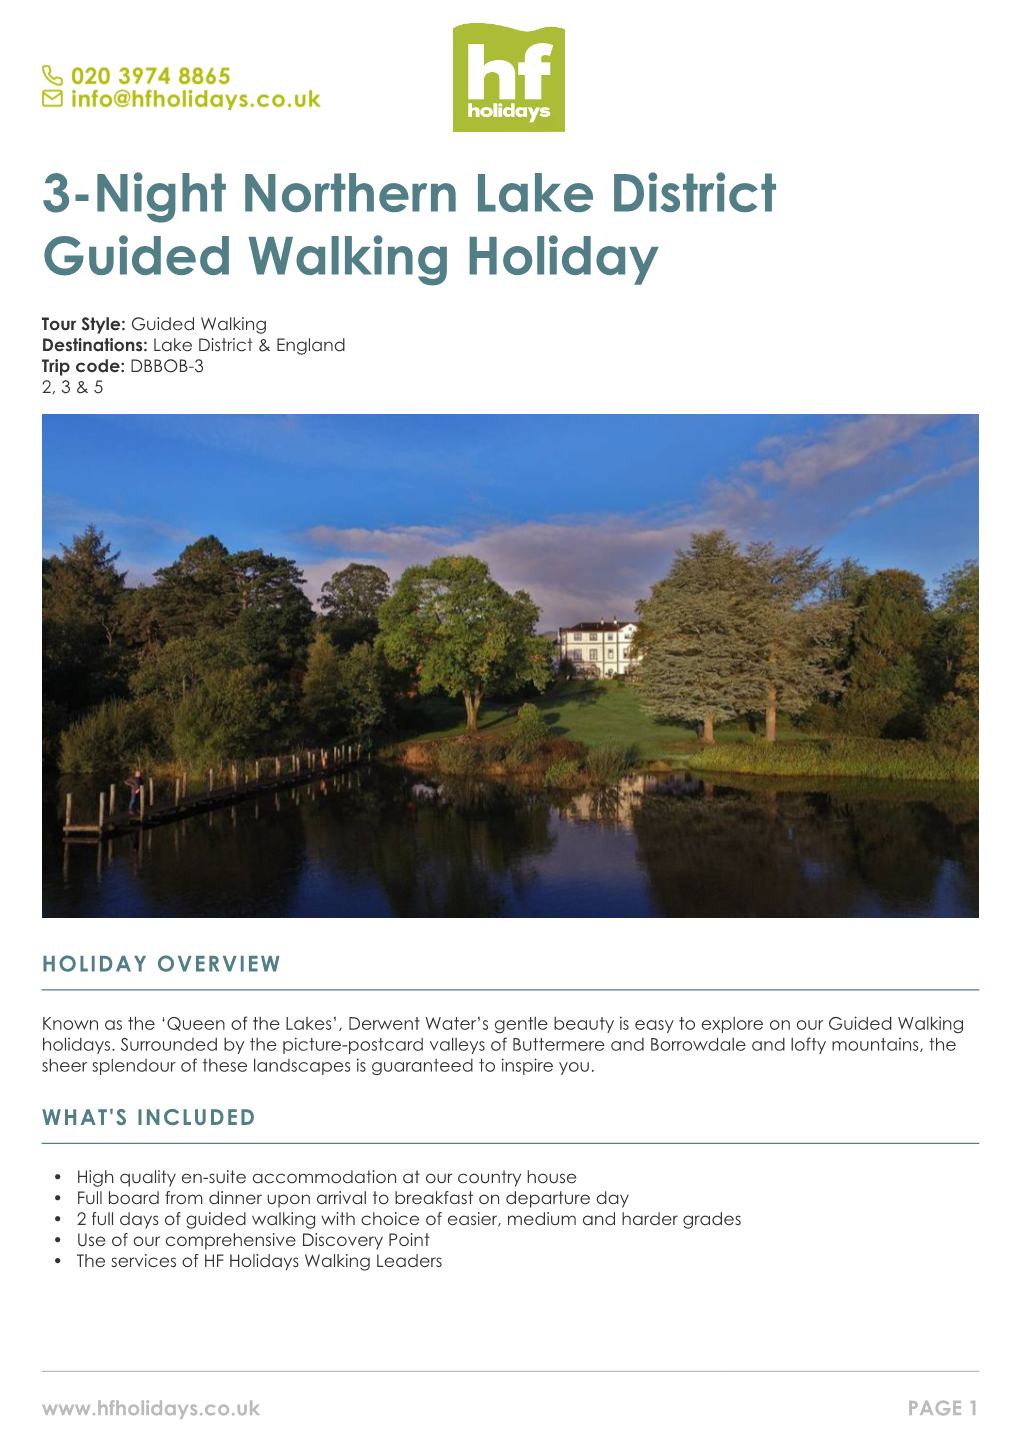 3-Night Northern Lake District Guided Walking Holiday